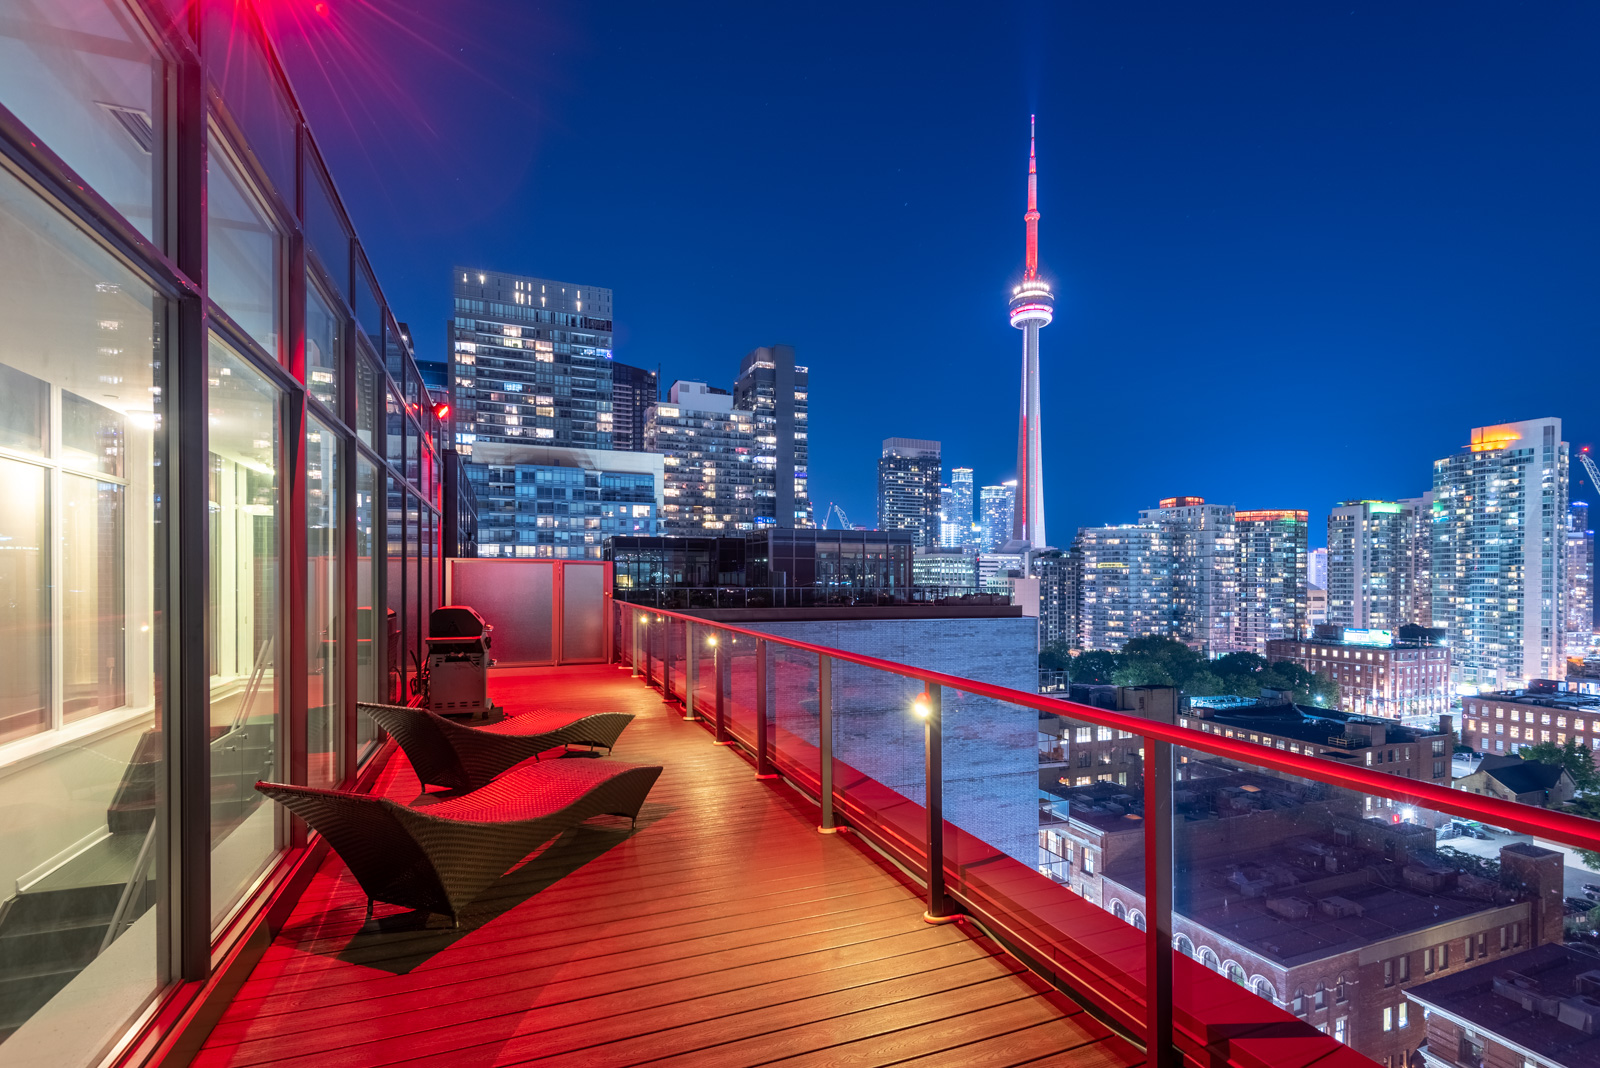 Photo of CN Tower and Toronto at night from Victory Lofts Penthouse Suite in 478 King St W Toronto.